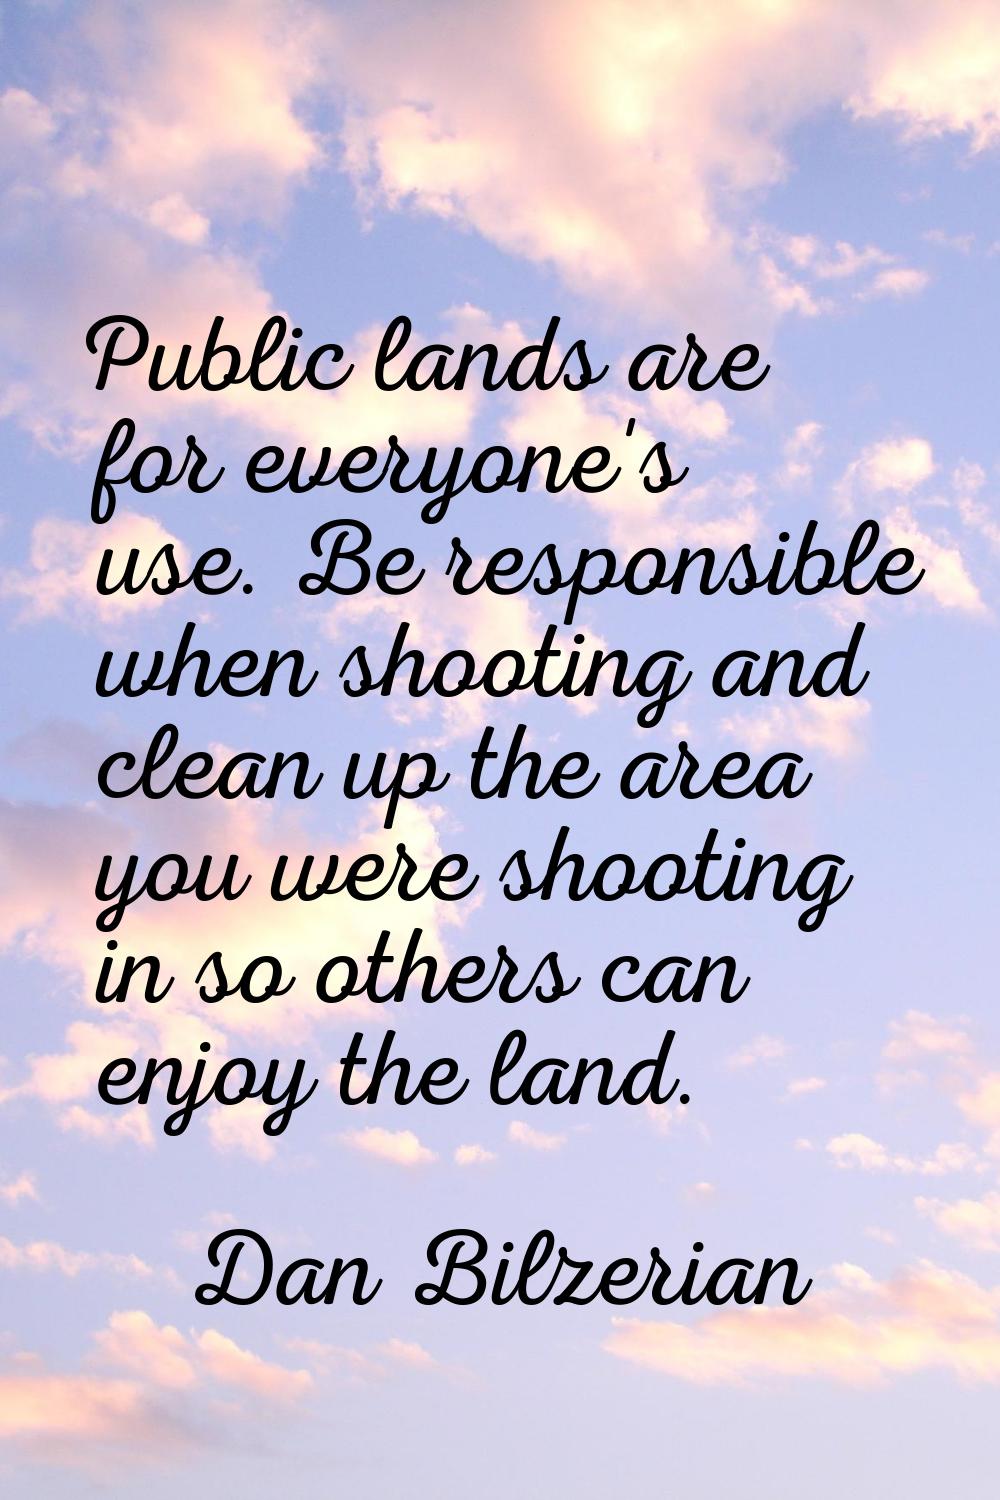 Public lands are for everyone's use. Be responsible when shooting and clean up the area you were sh